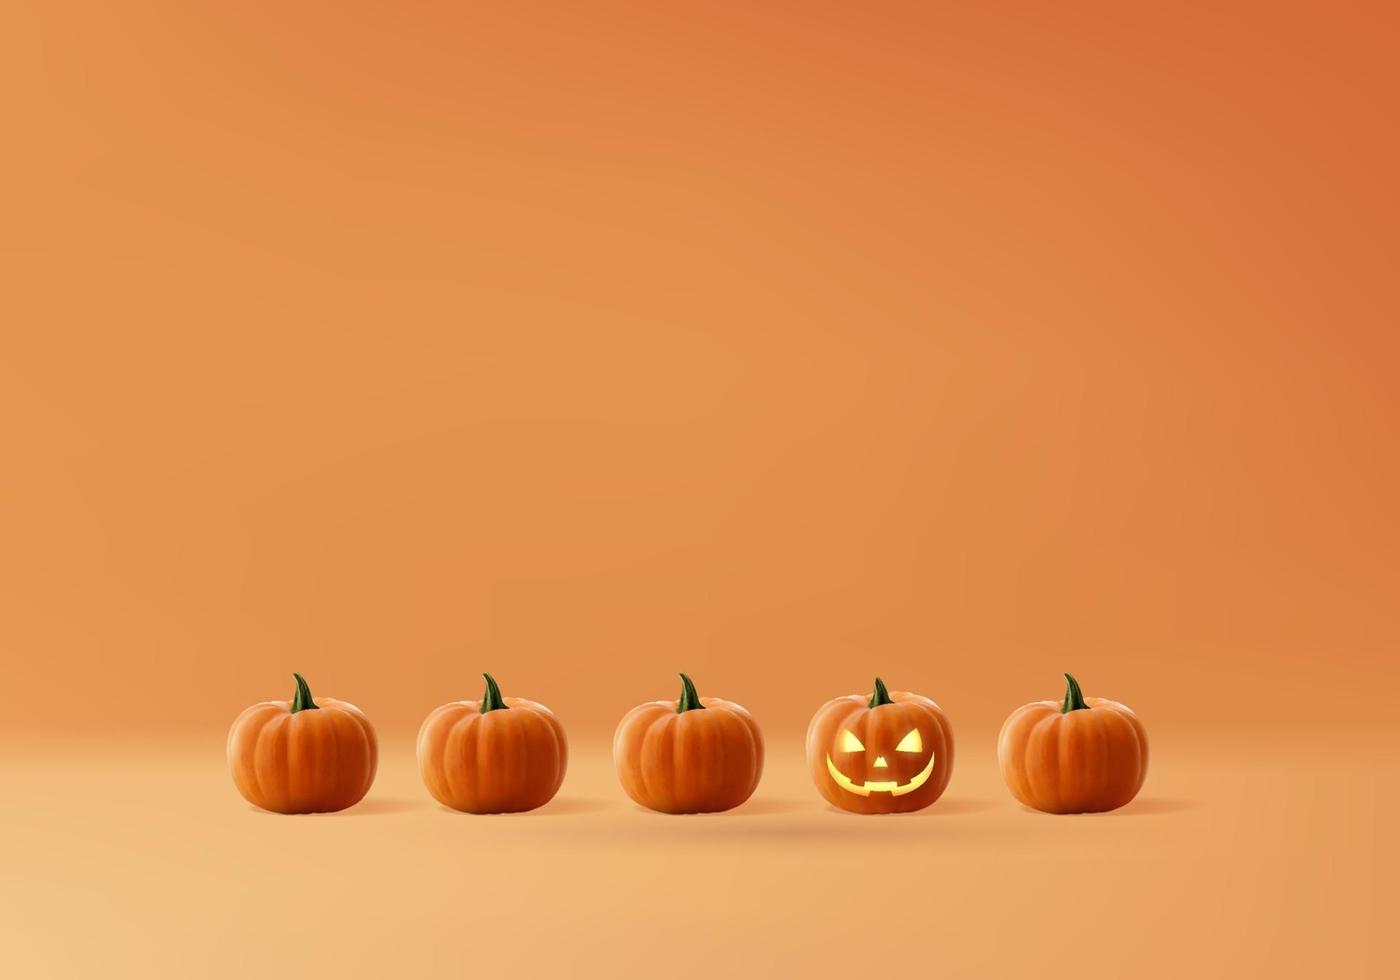 3d halloween minimal smoke and pumpkin podium for products background vector